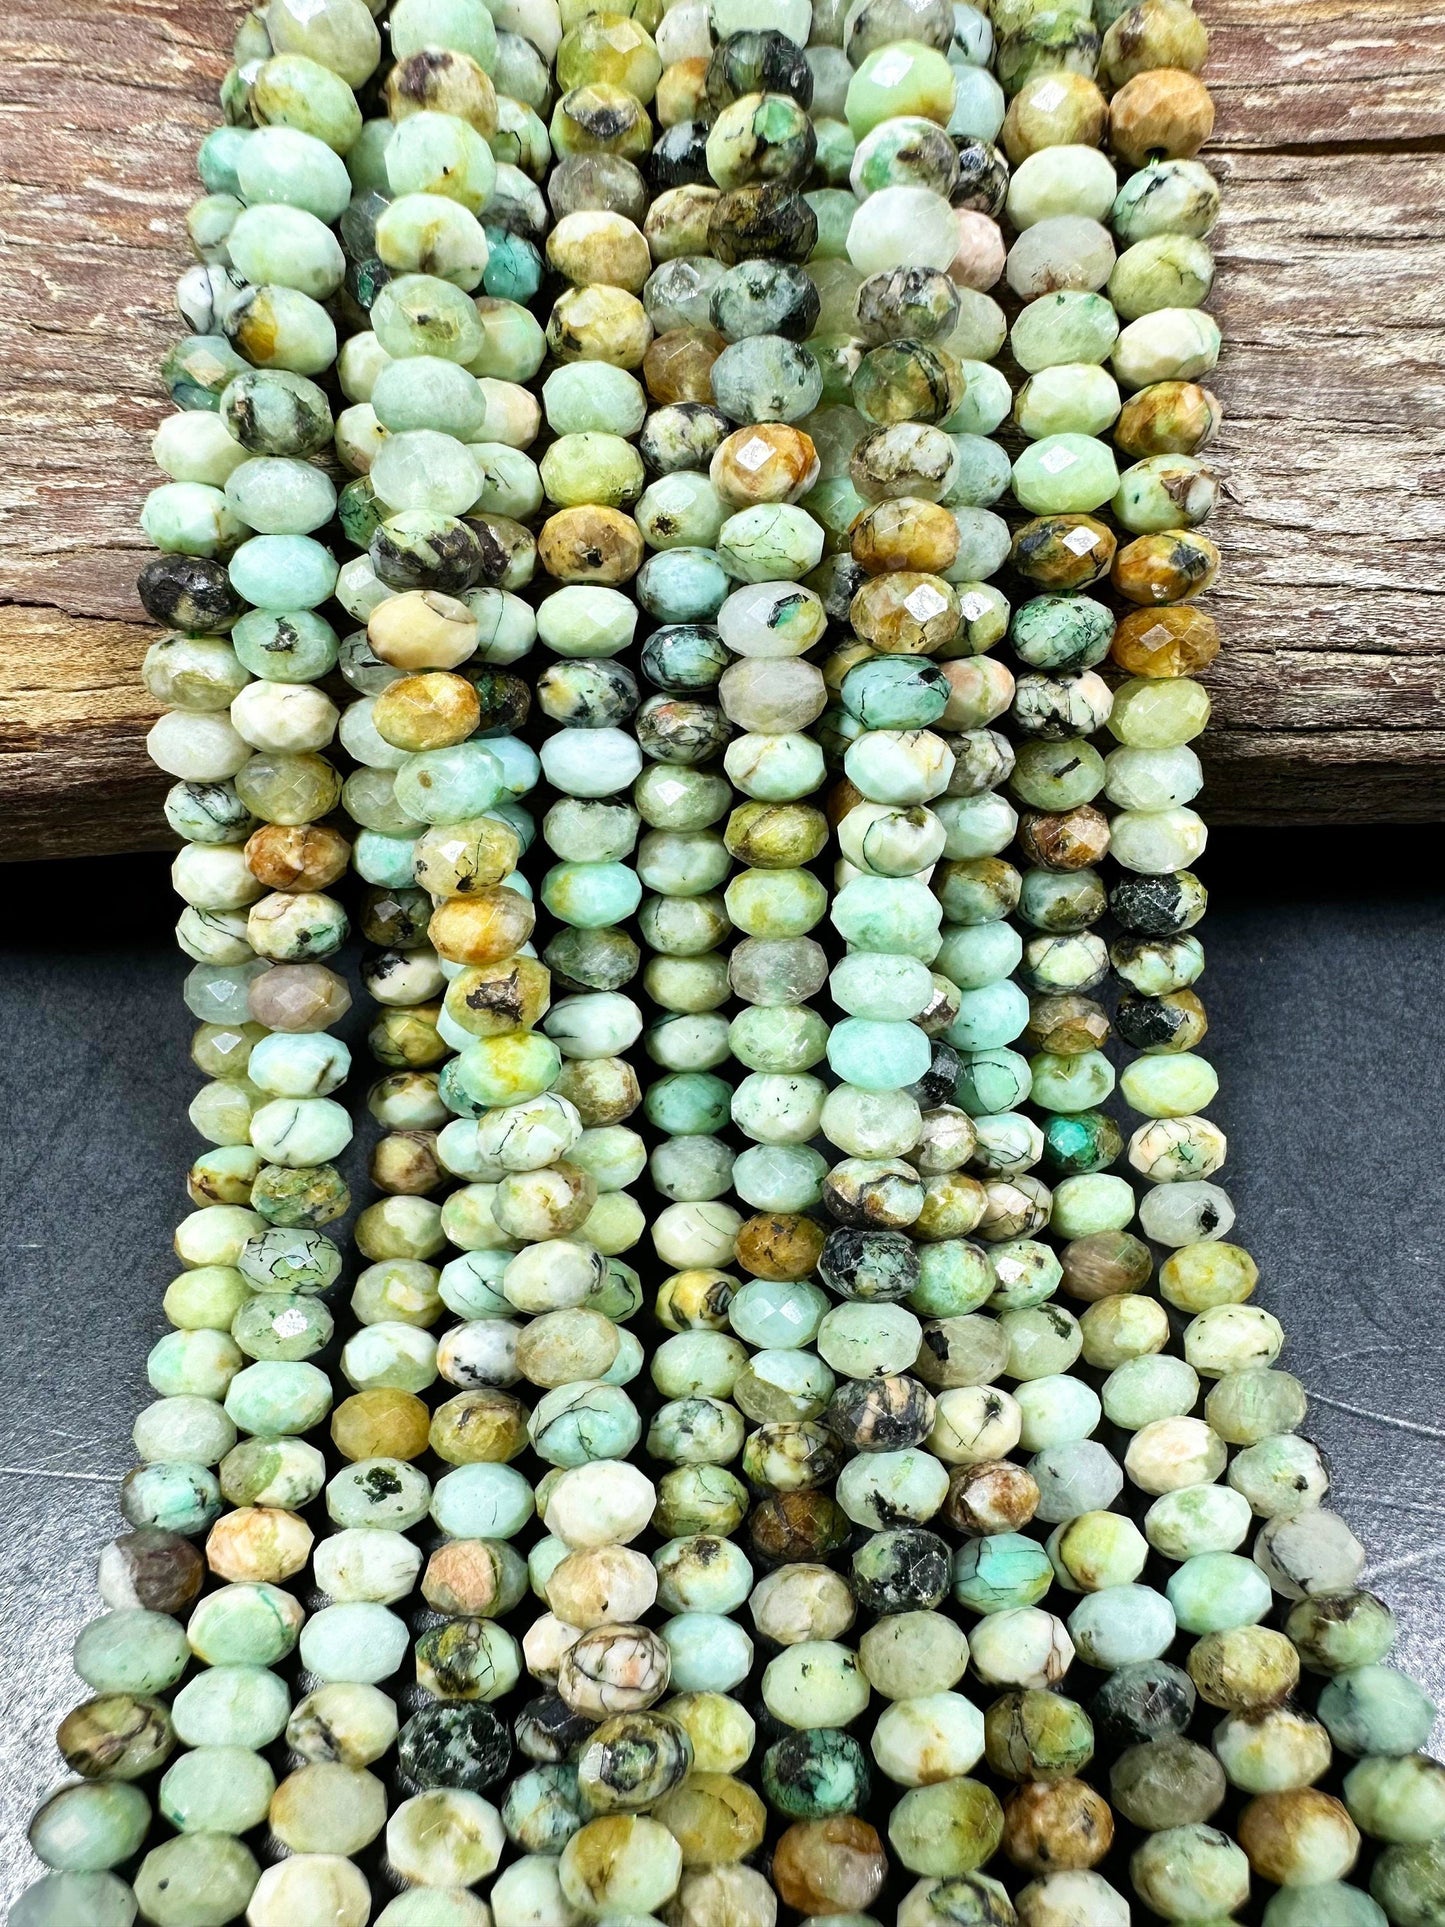 NATURAL Chrysocolla Gemstone Faceted Rondelle Shape 6x4mm Bead. Gorgeous Green Brown Color. Great Quality Full Strand 15.5"